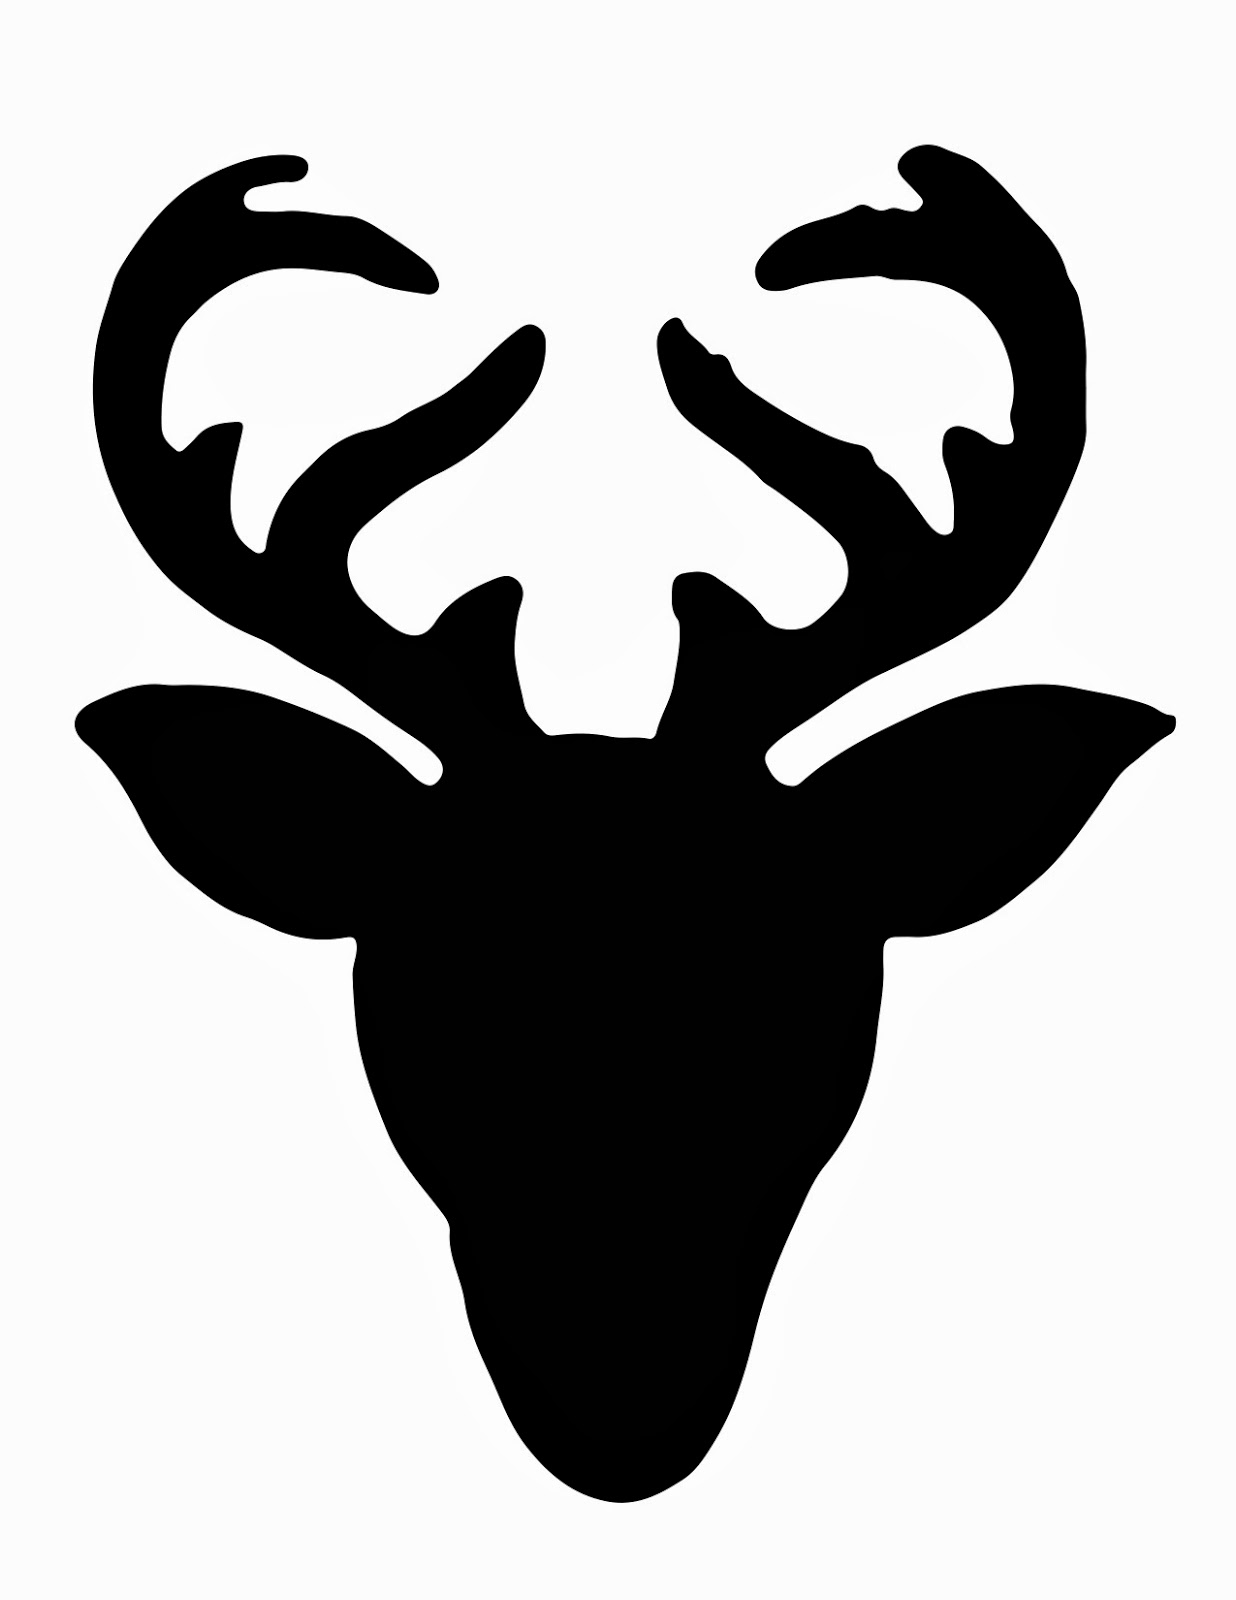 Reindeer Silhouette Clipart Black And White